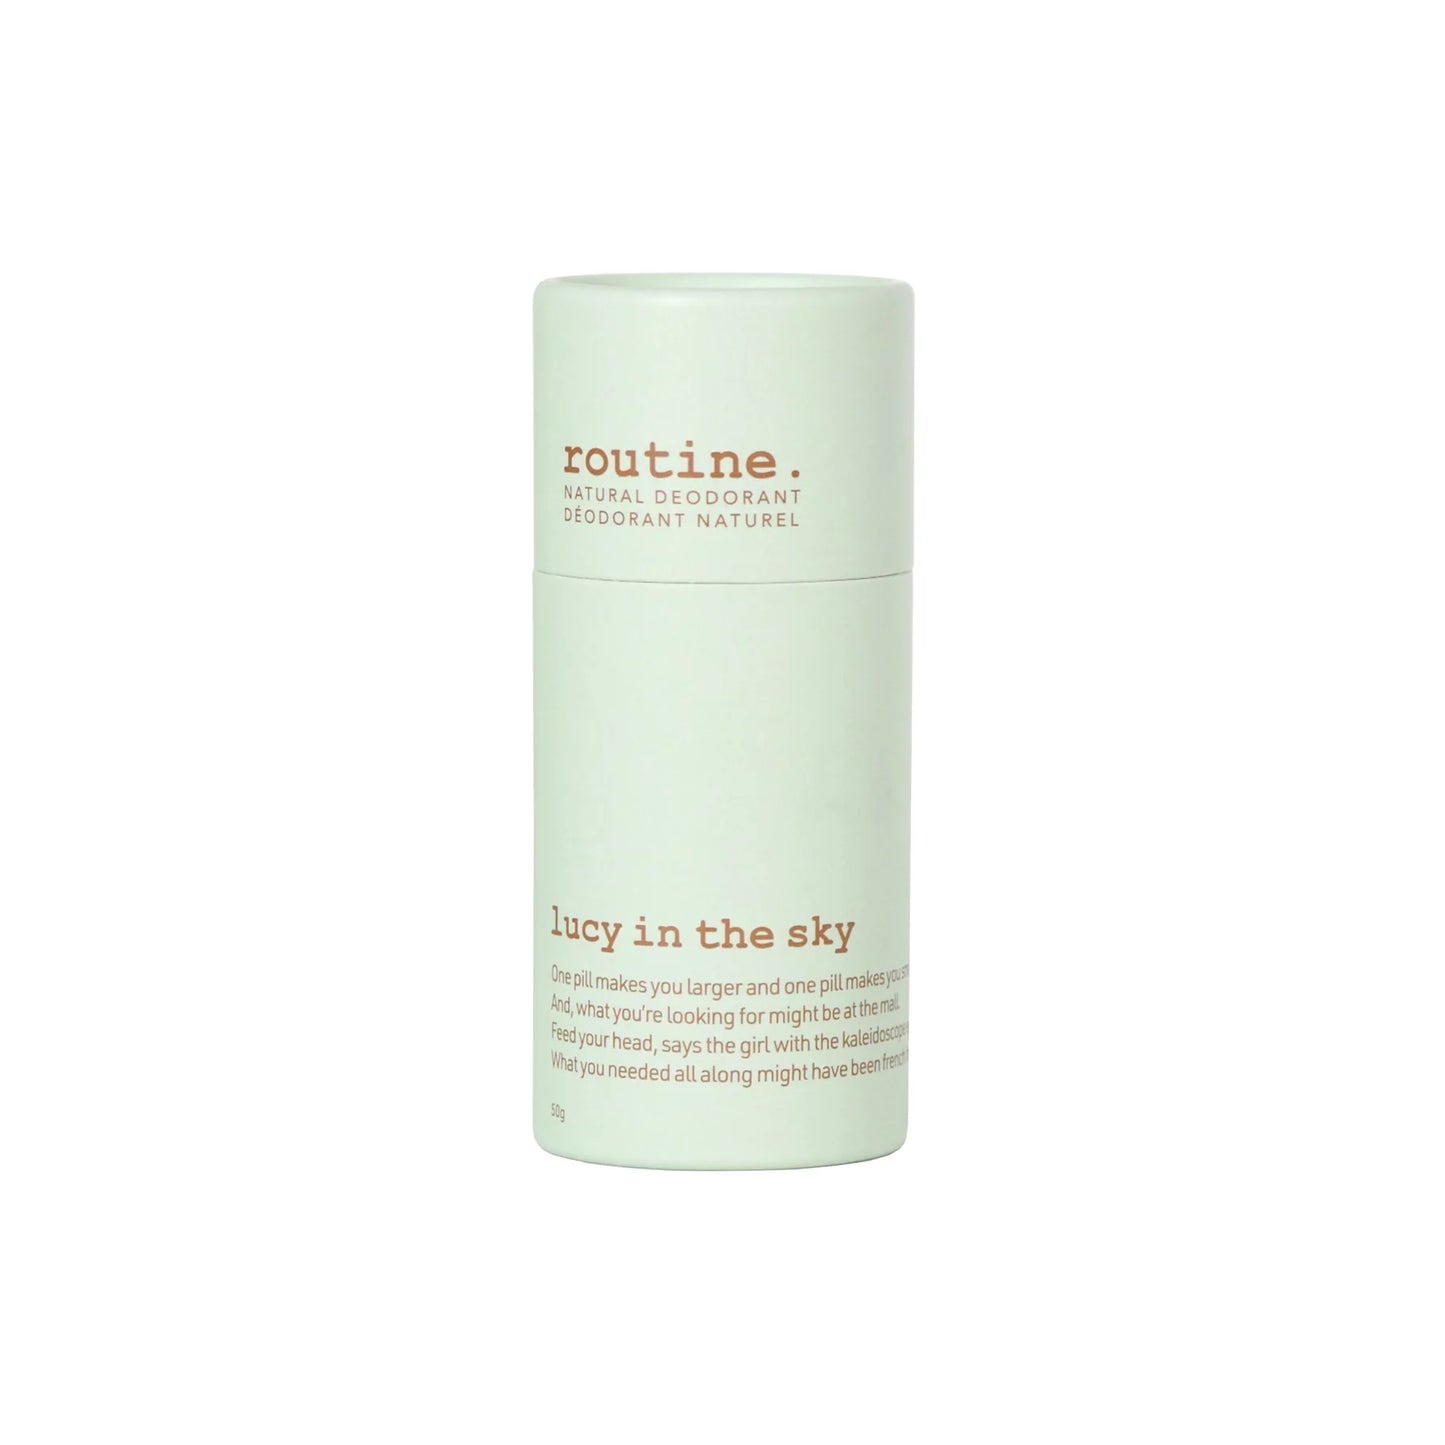 Routine Deodorant Stick- Lucy in the Sky